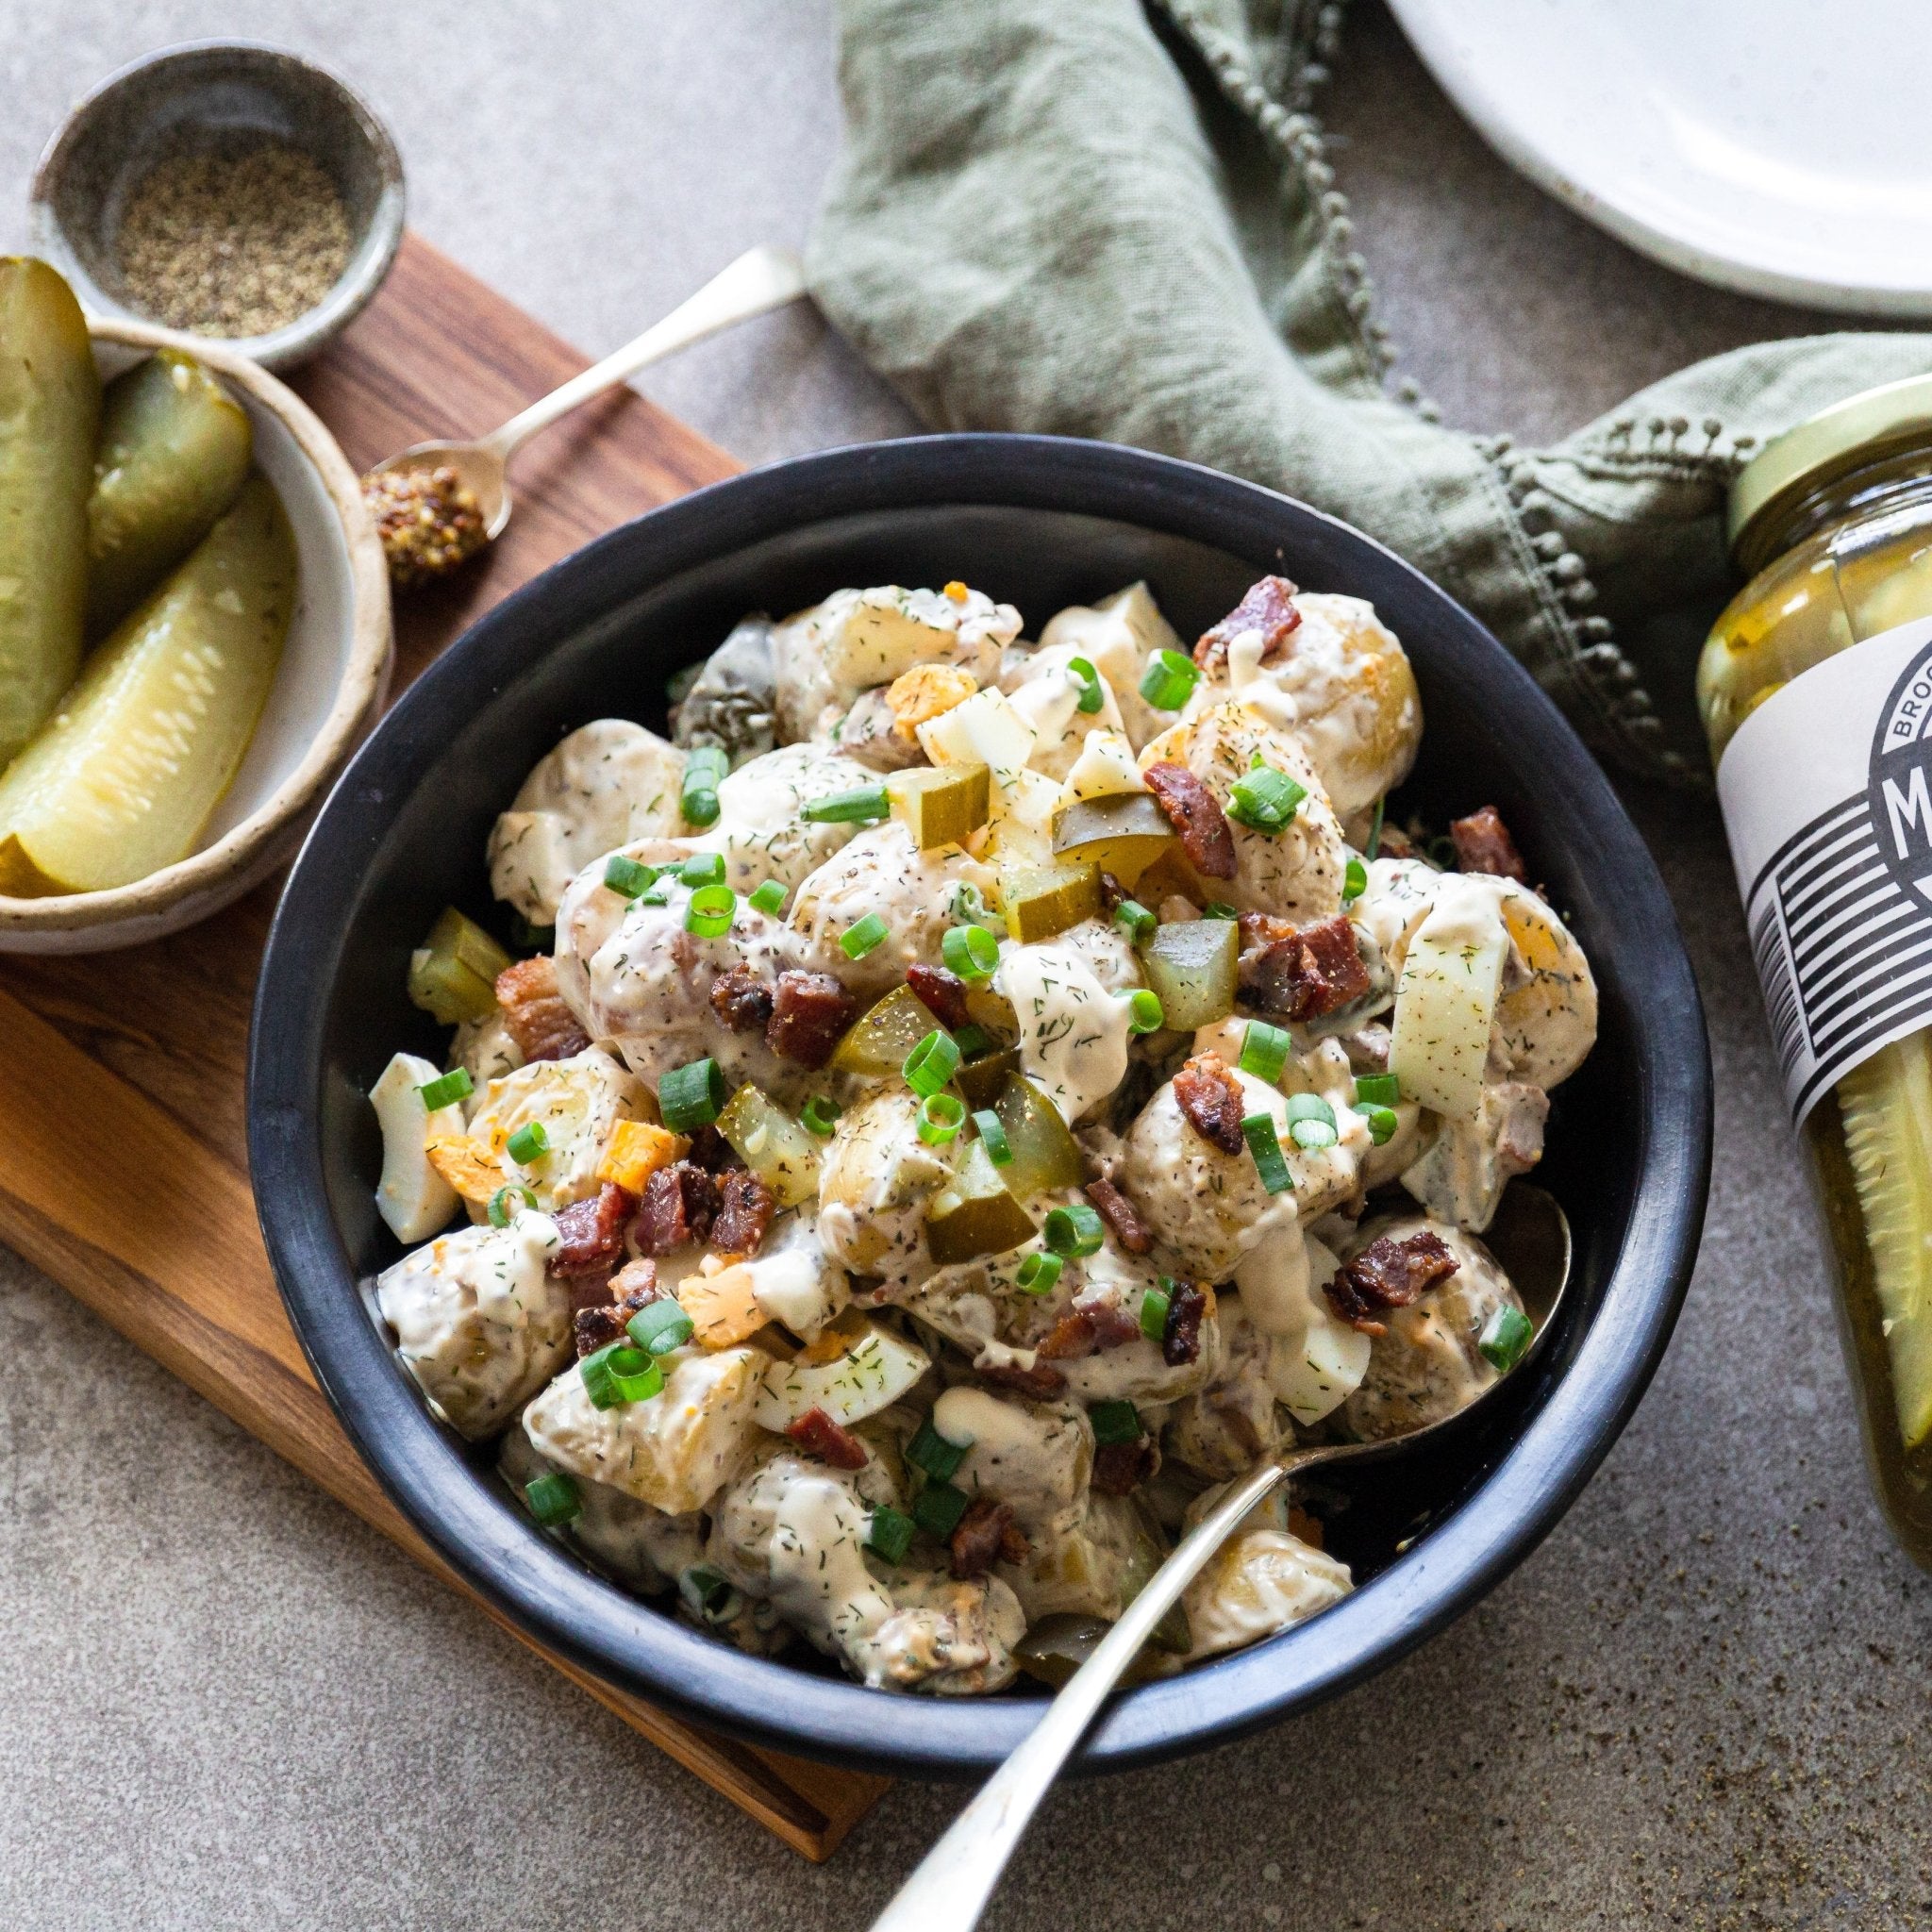 Rich and Creamy Potato Salad with McClure's Pickles and Bacon - Cook & Nelson